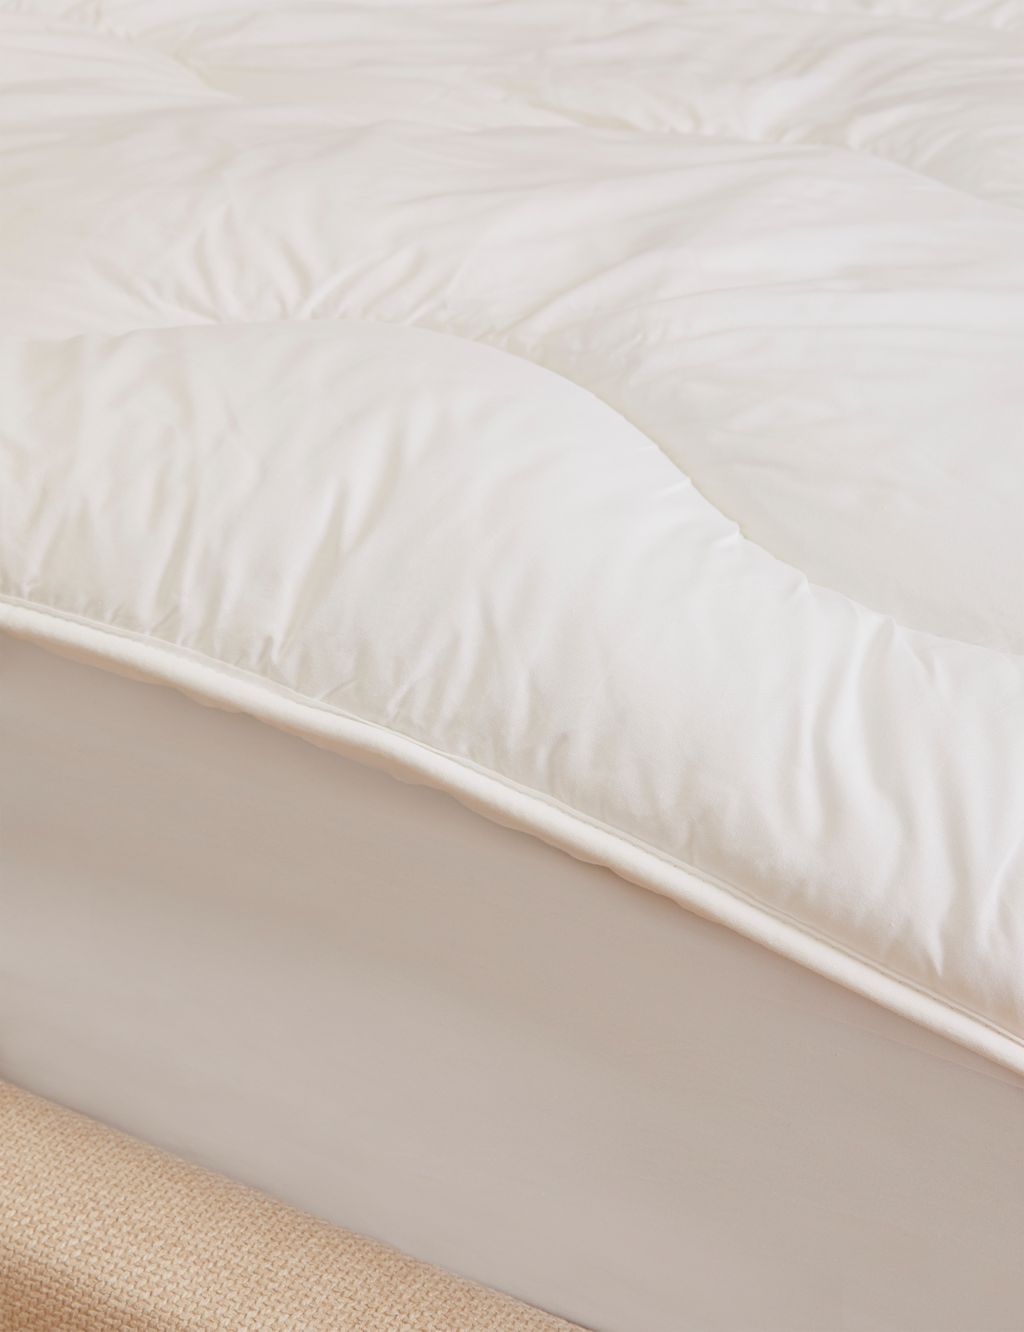 Comfortably Cool Mattress Topper image 3